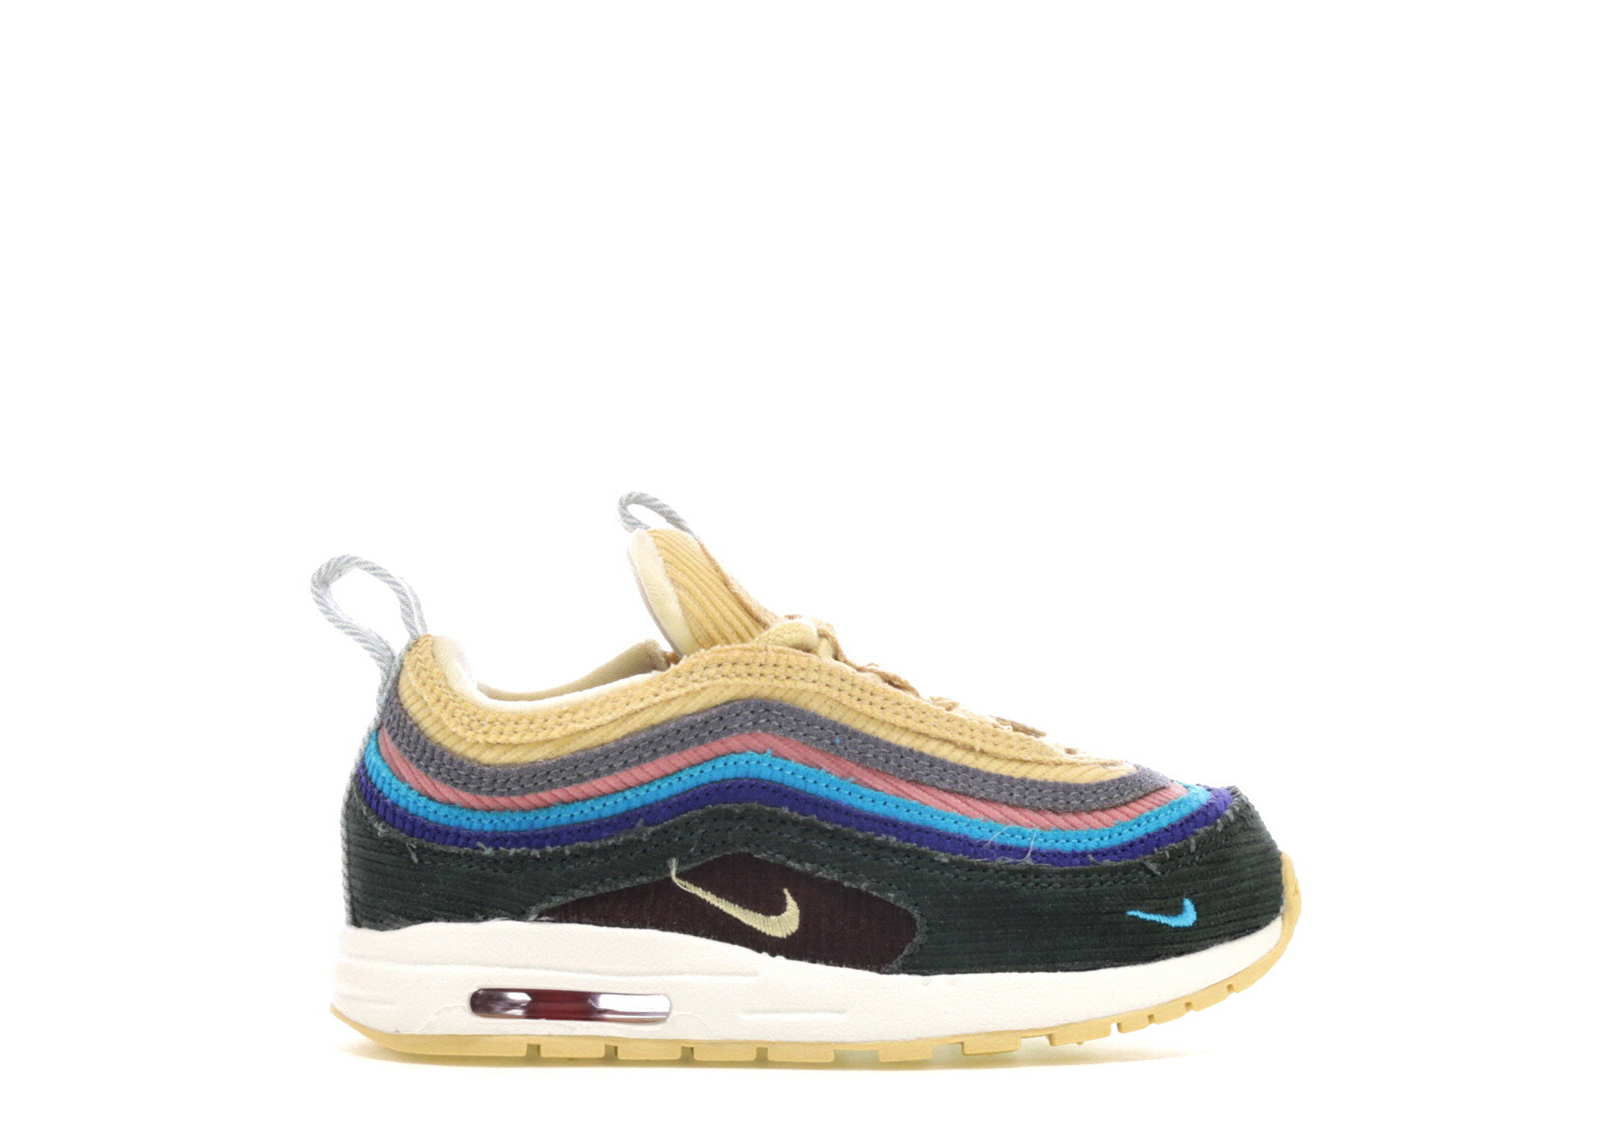 nike air max 97 sean wotherspoon stockx